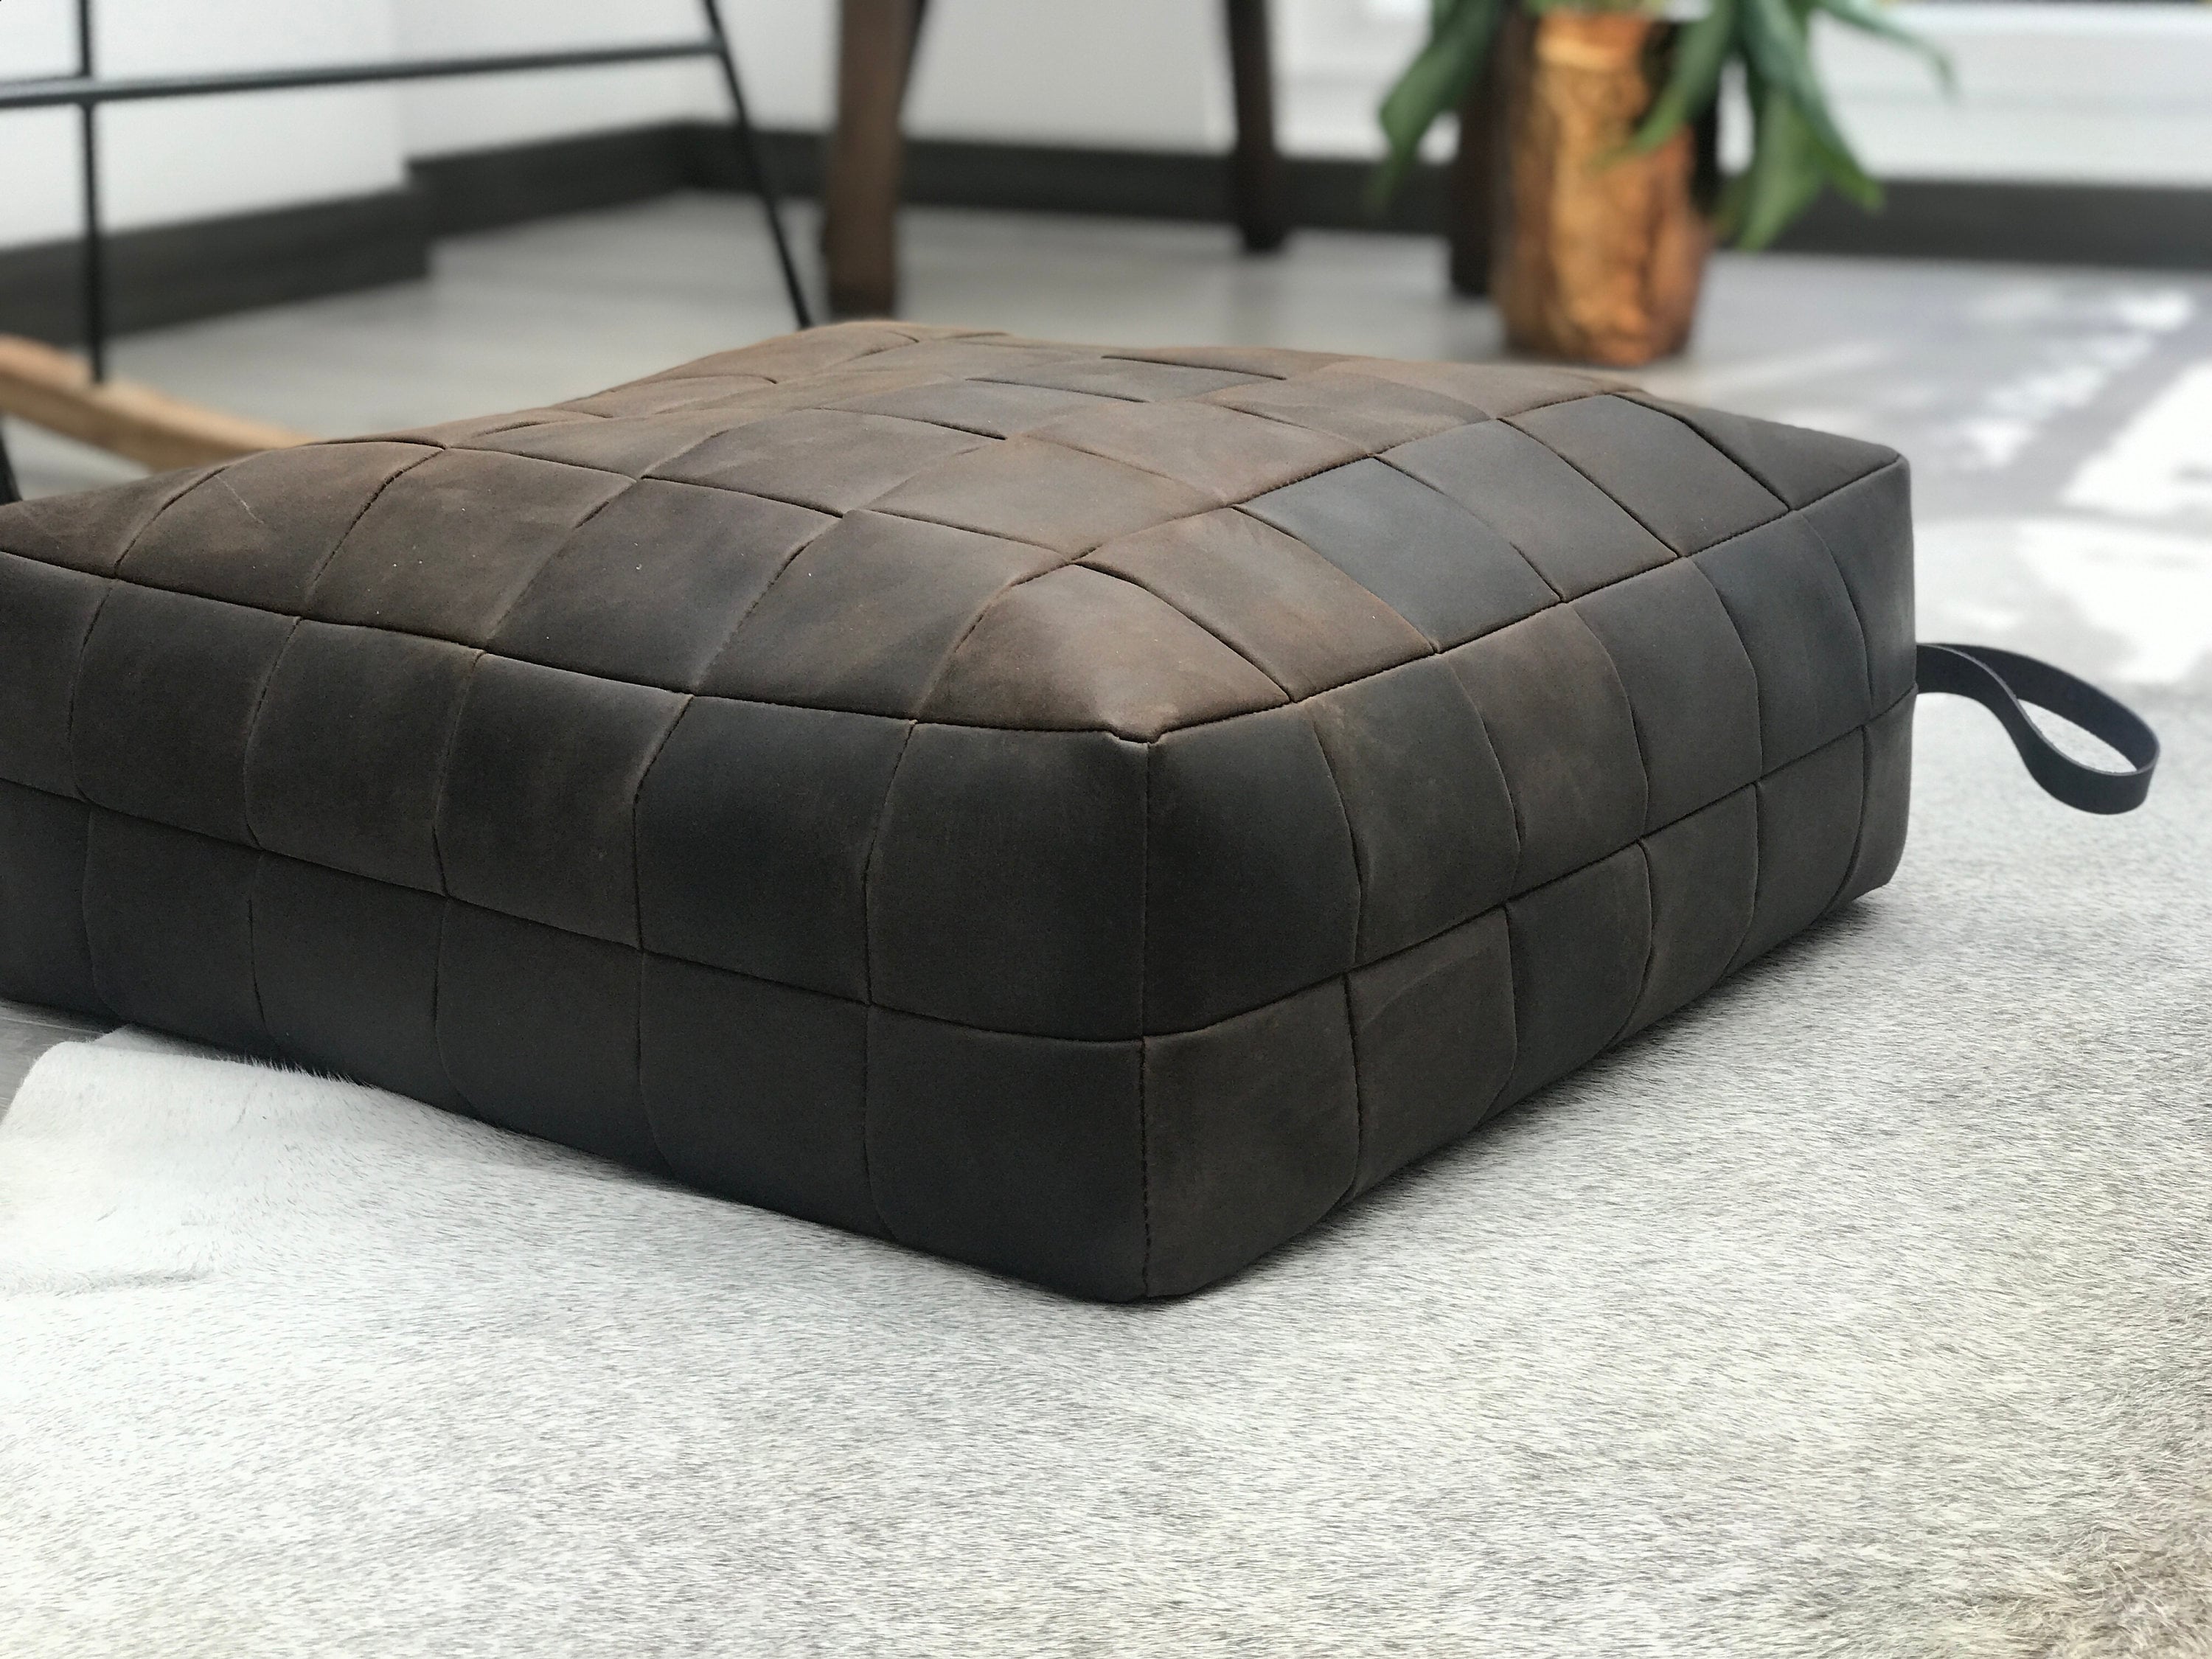 Brown Leather Floor Cushion Pillow Seating. Pouf Sweden Etsy Ottoman 